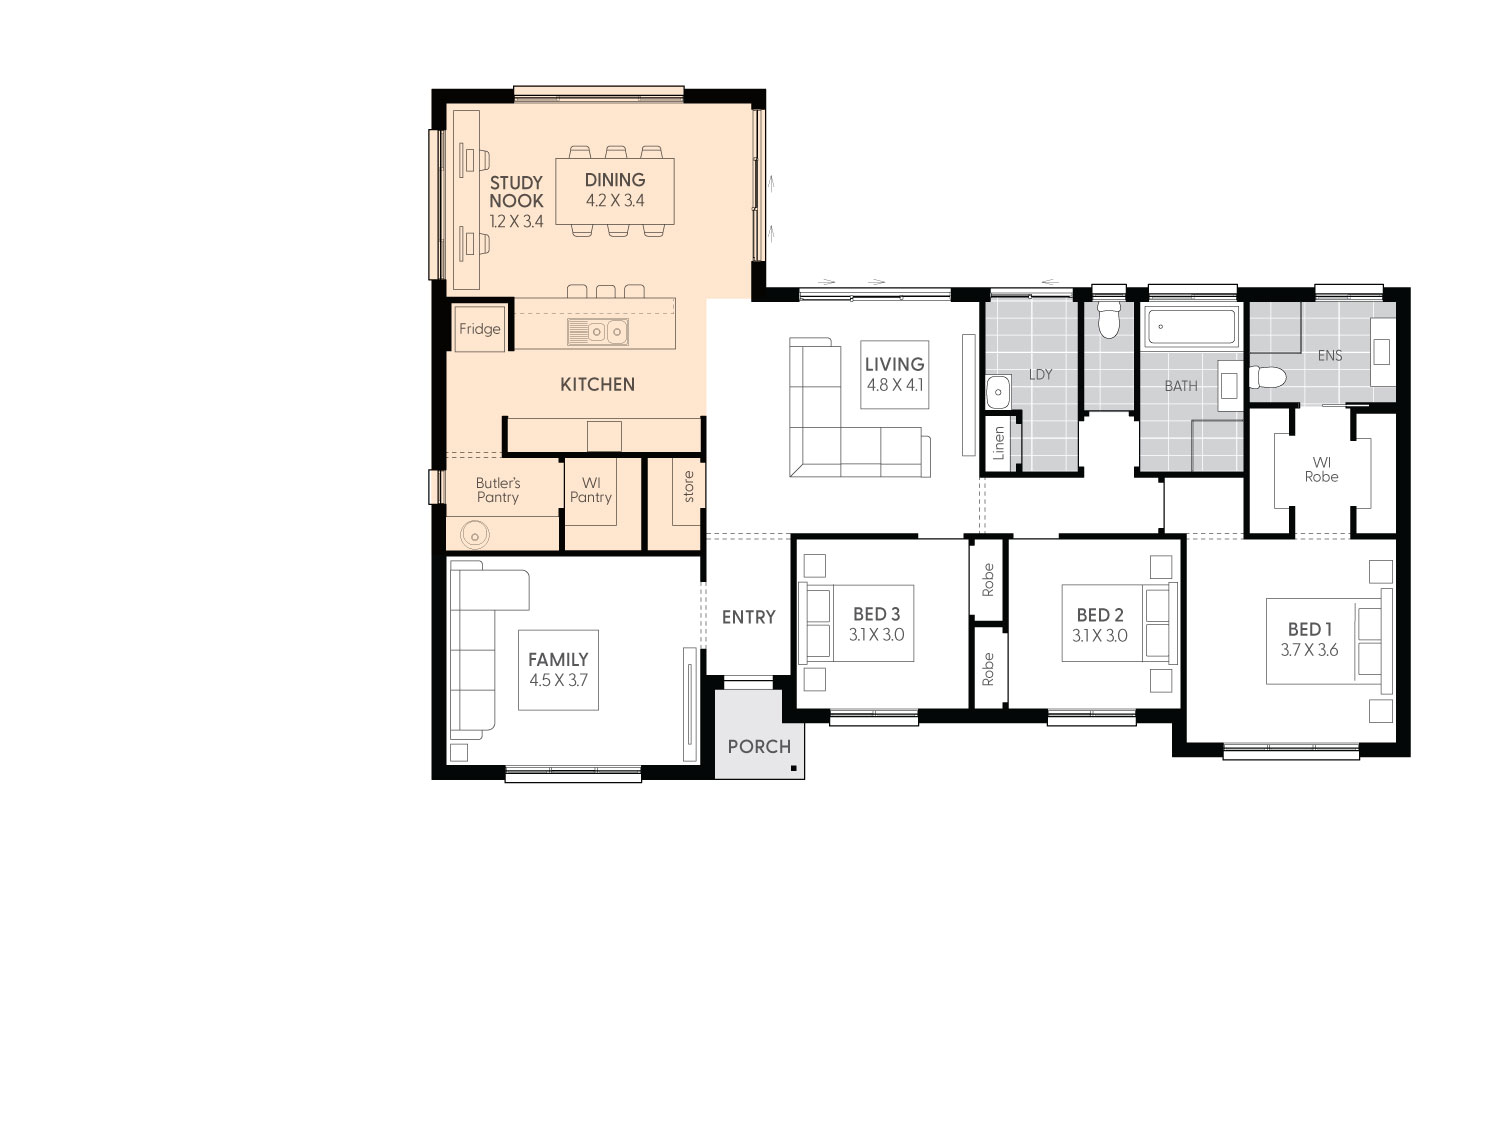 Hillwood15-floor-plan-BUTLER'S-PANTRY-to-ALTERNATE-KITCHEN-AND-DINING-LAYOUT-LHS_0.jpg 